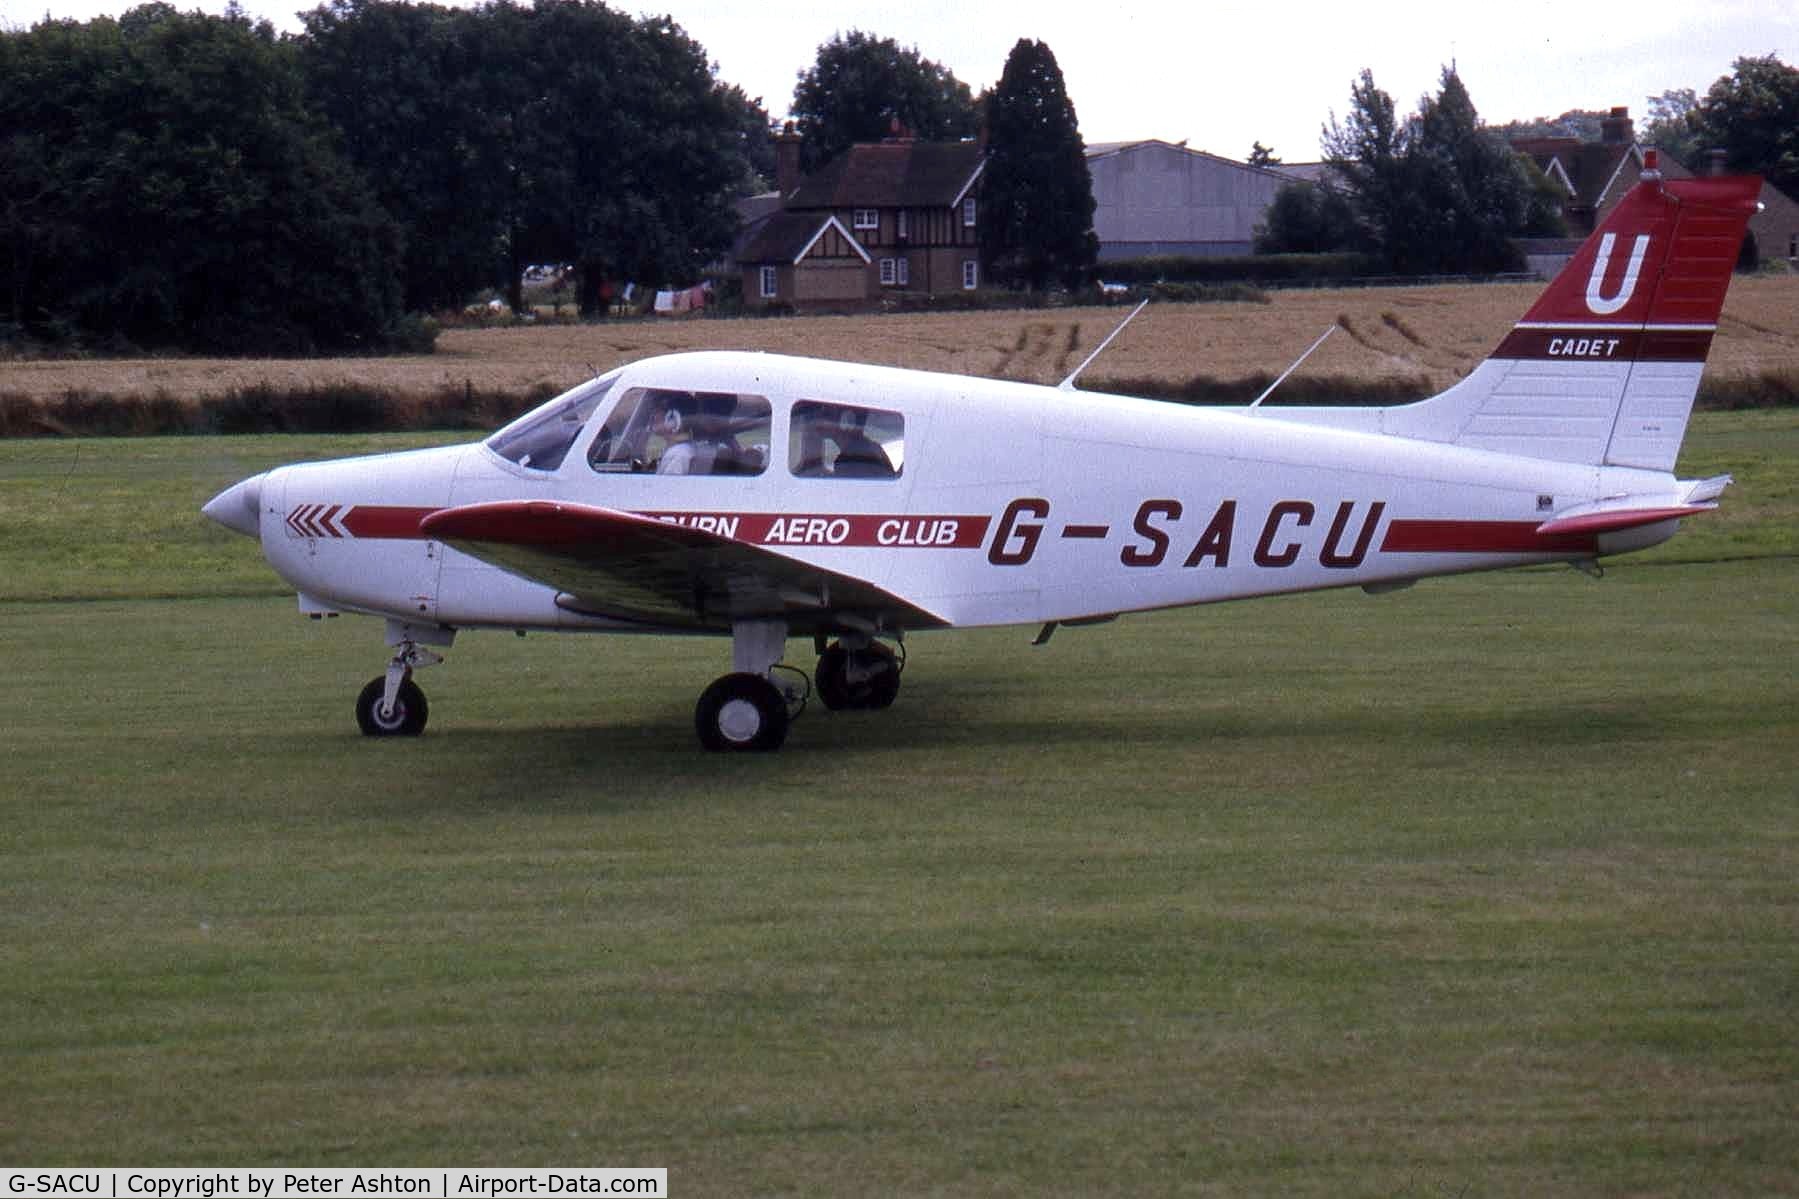 G-SACU, 1988 Piper PA-28-161 Cadet C/N 2841049, Old Warden, Bedfordshire, England. August 1993